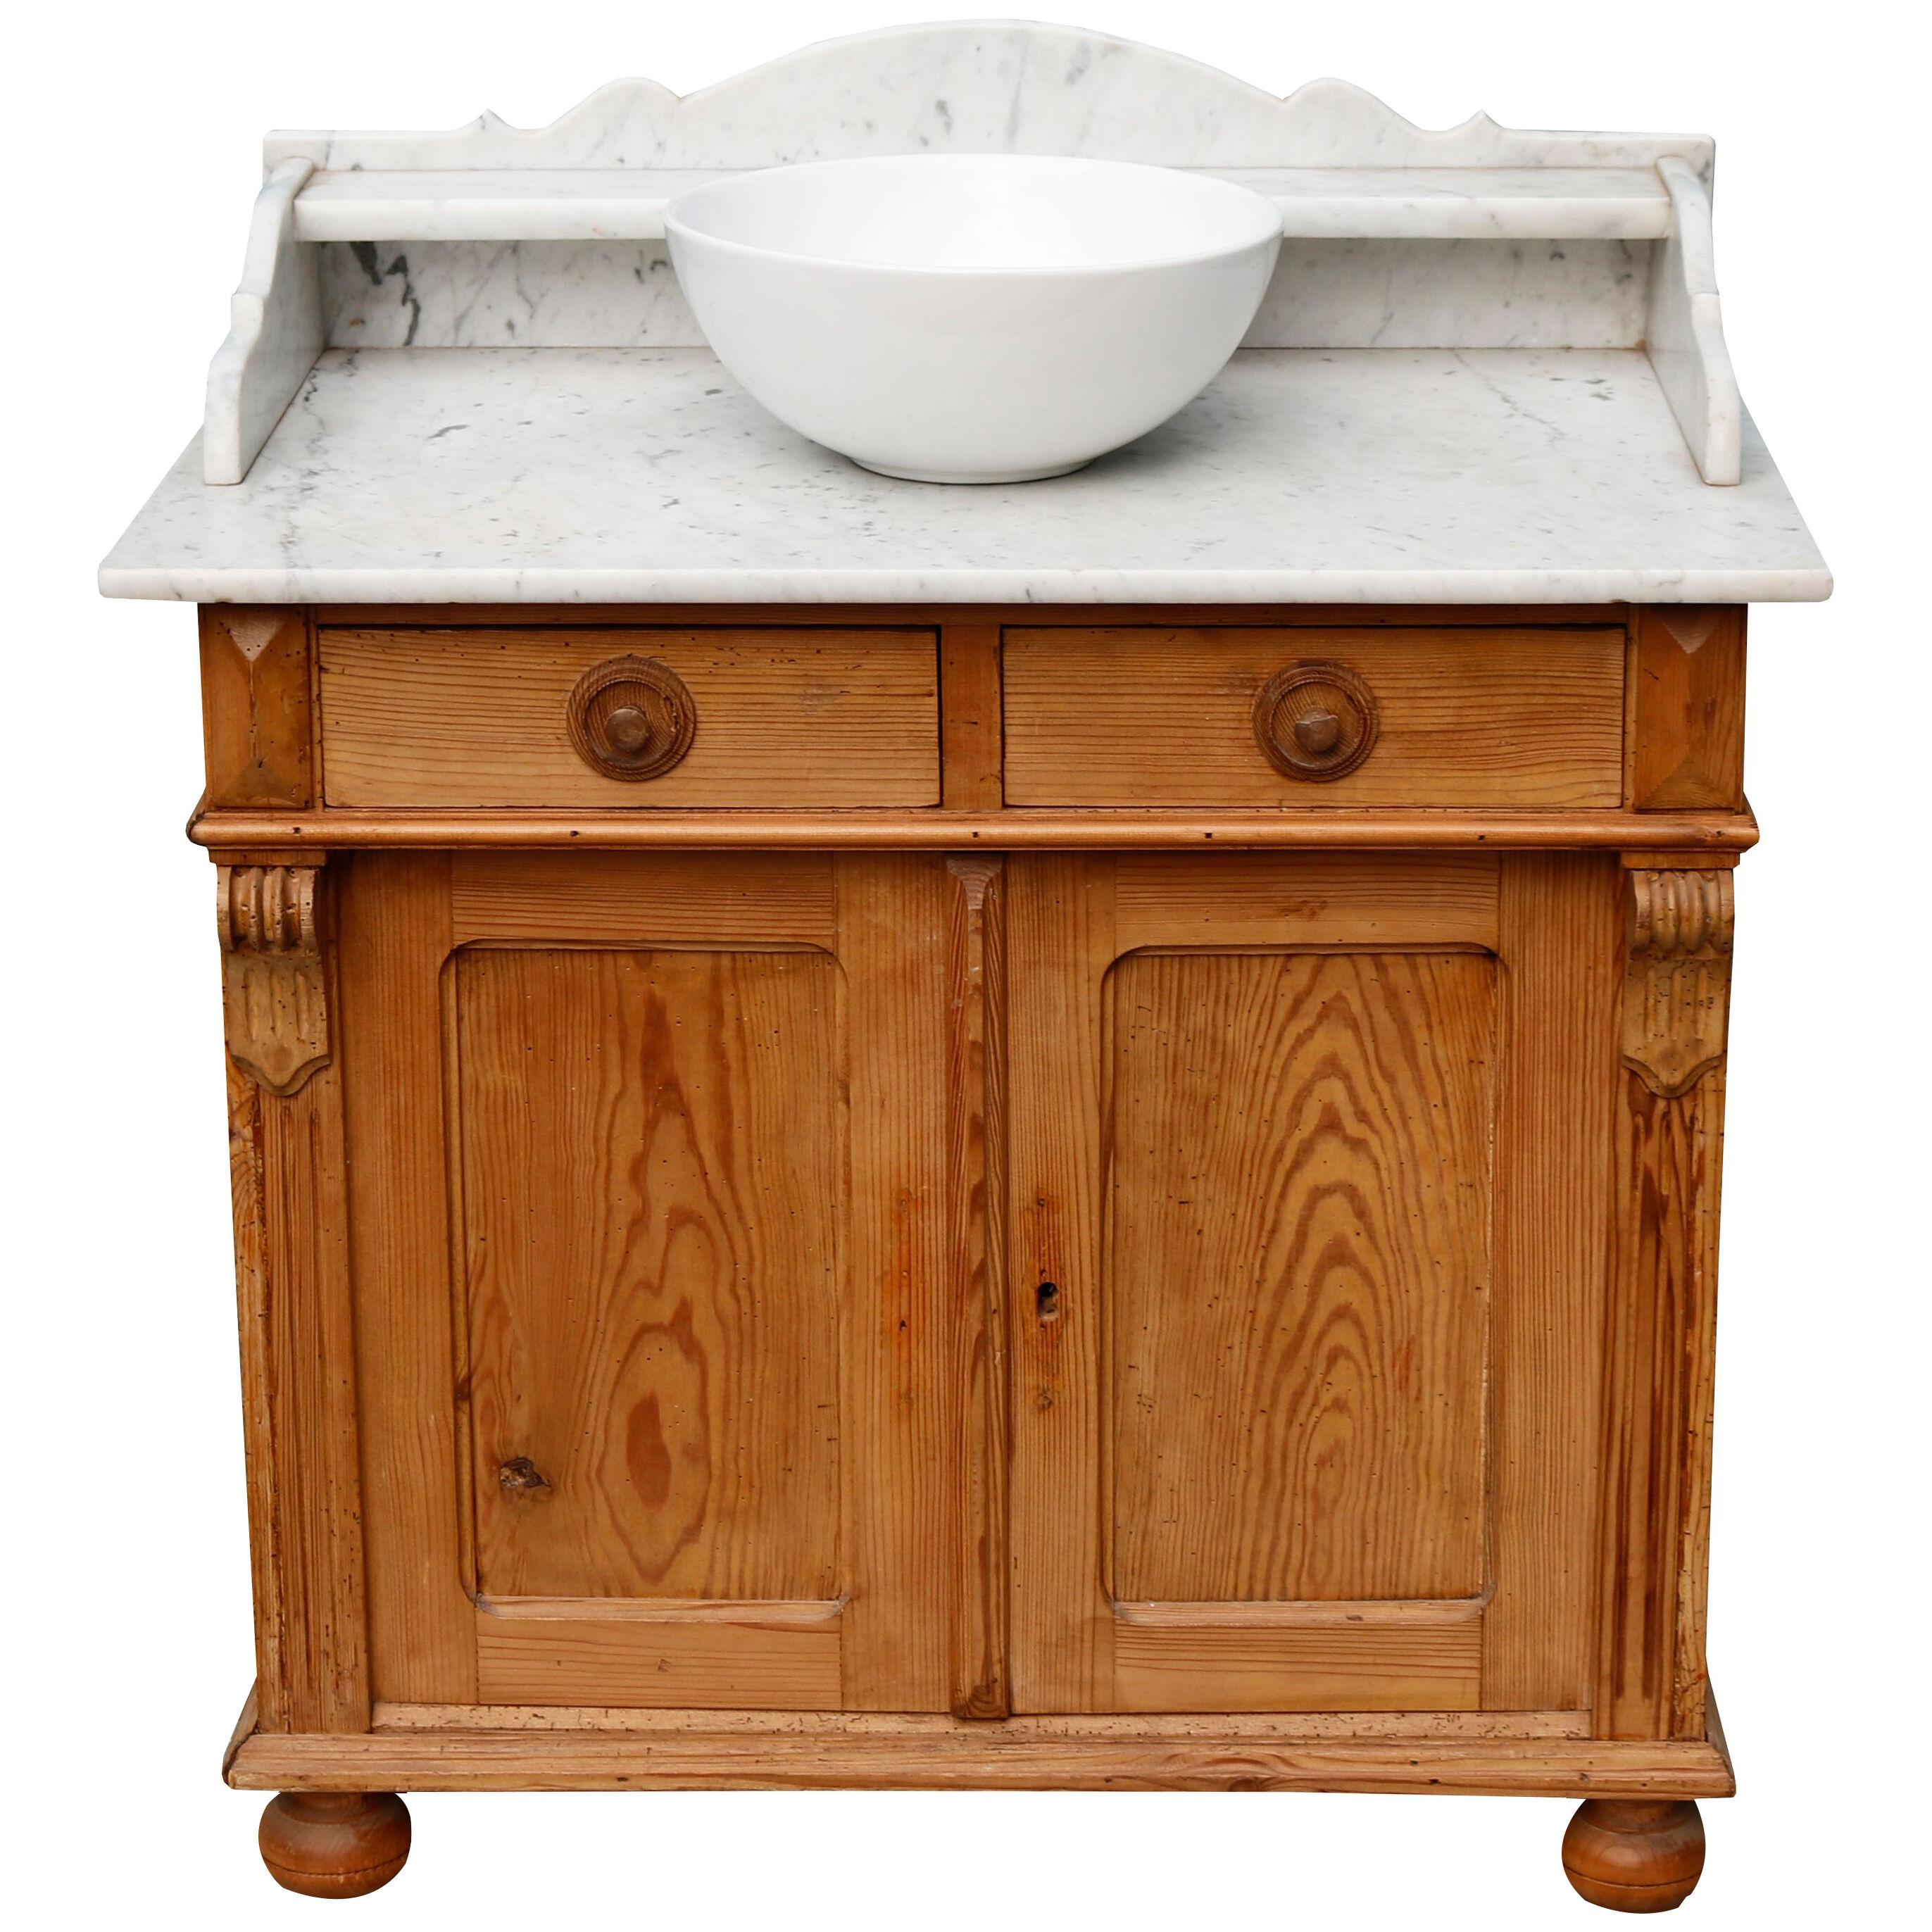 A Reclaimed Victorian Style Carrara Marble Washstand